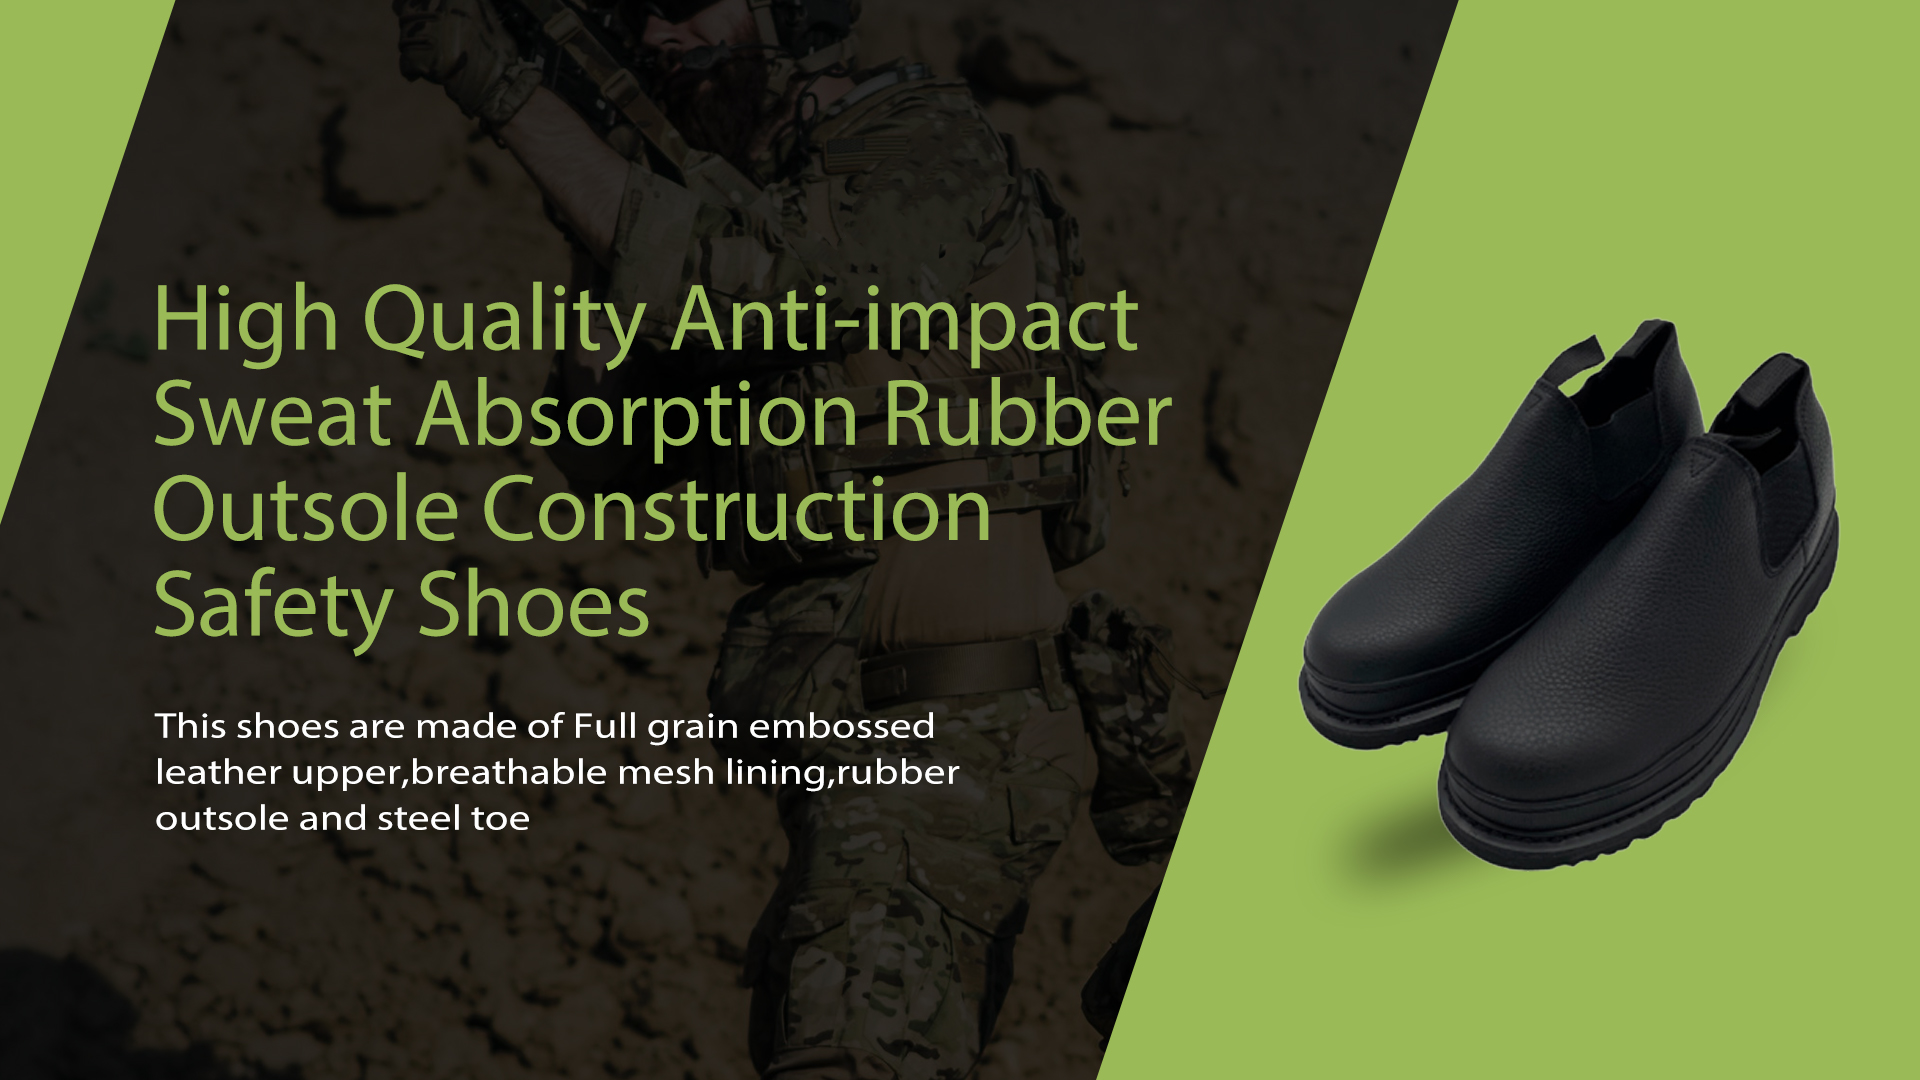 High Quality Anti-impact Sweat Absorption Rubber Outsole Construction Safety Shoes